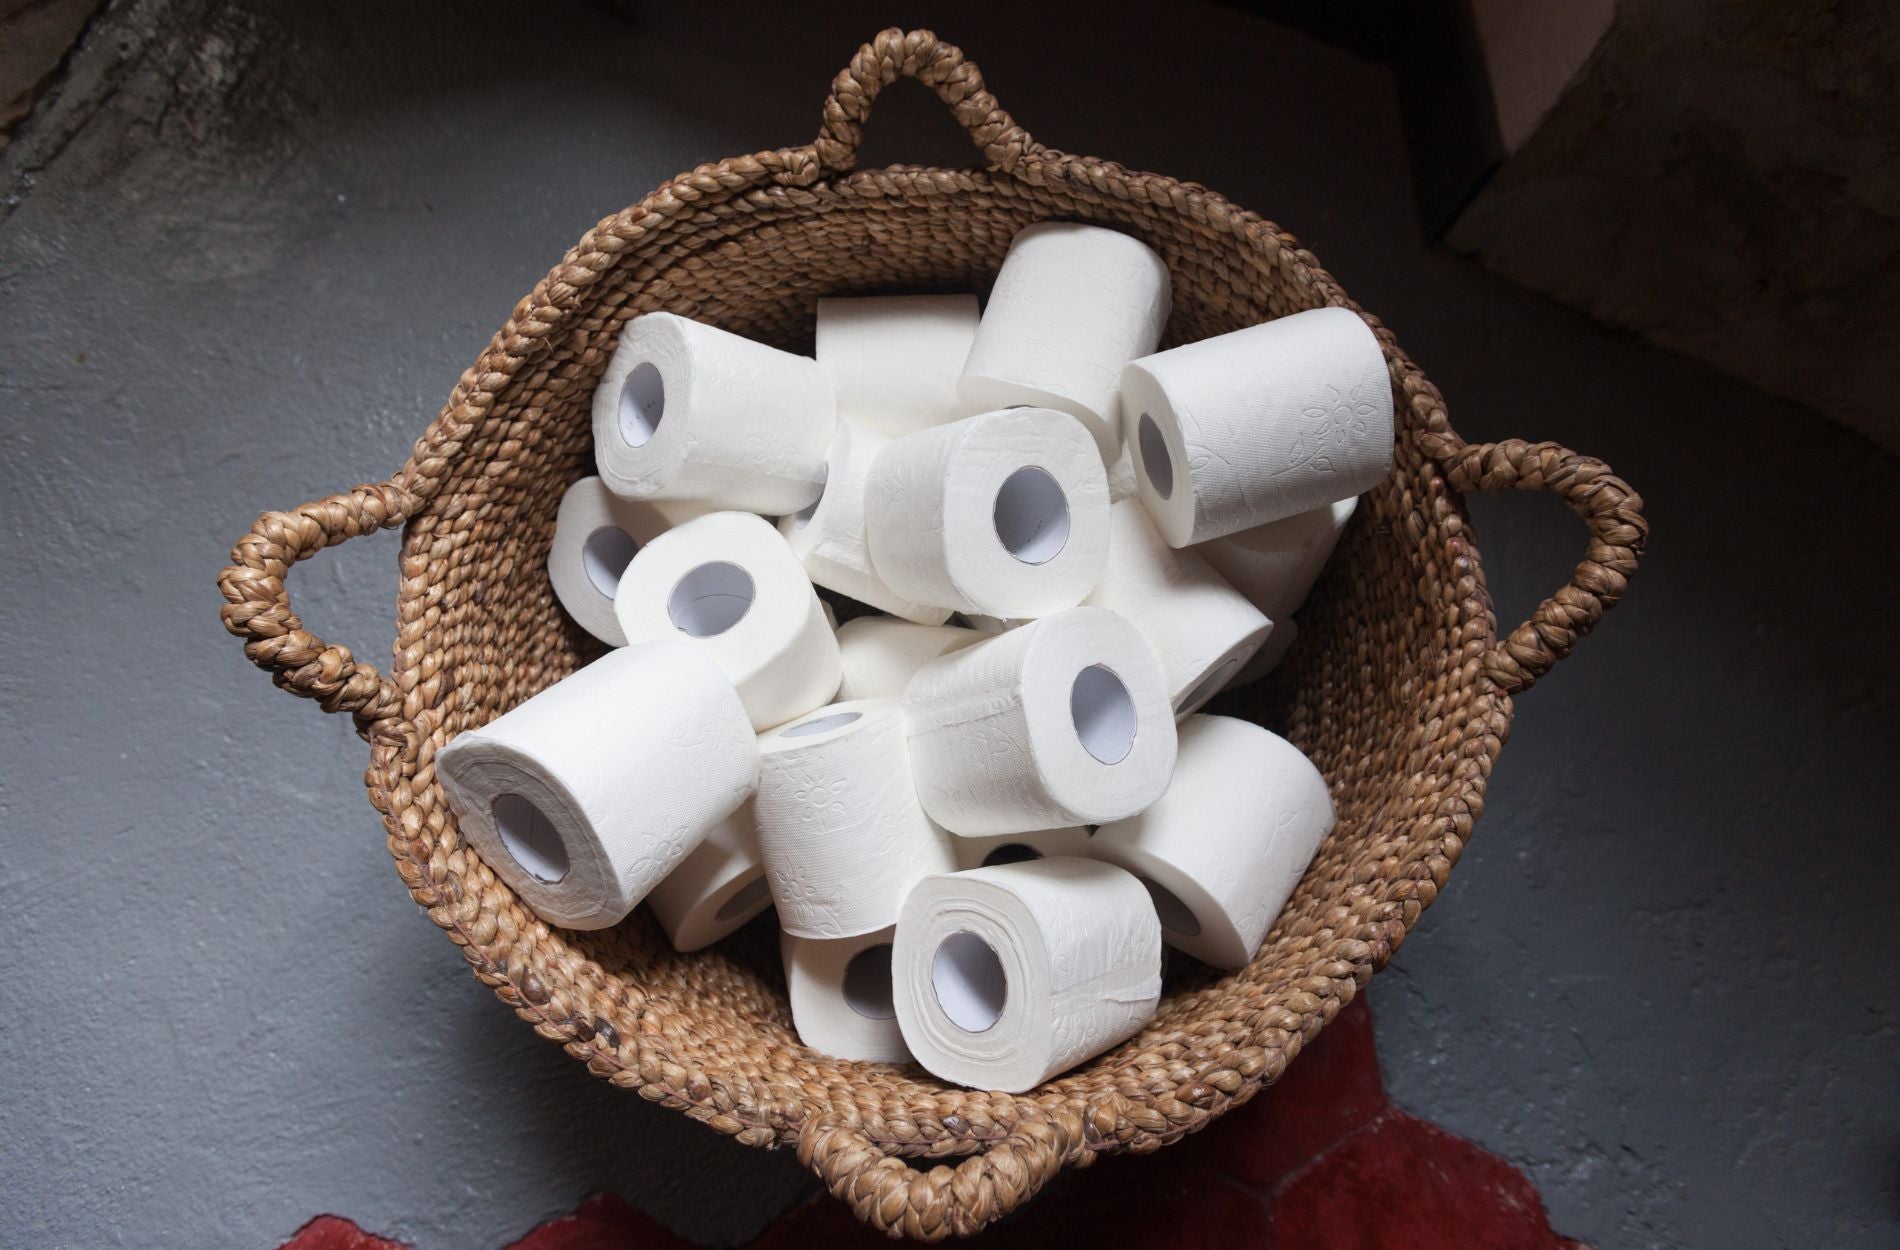 Top 7 Essential Questions to Ask When Choosing Your Eco-Friendly Toilet Paper